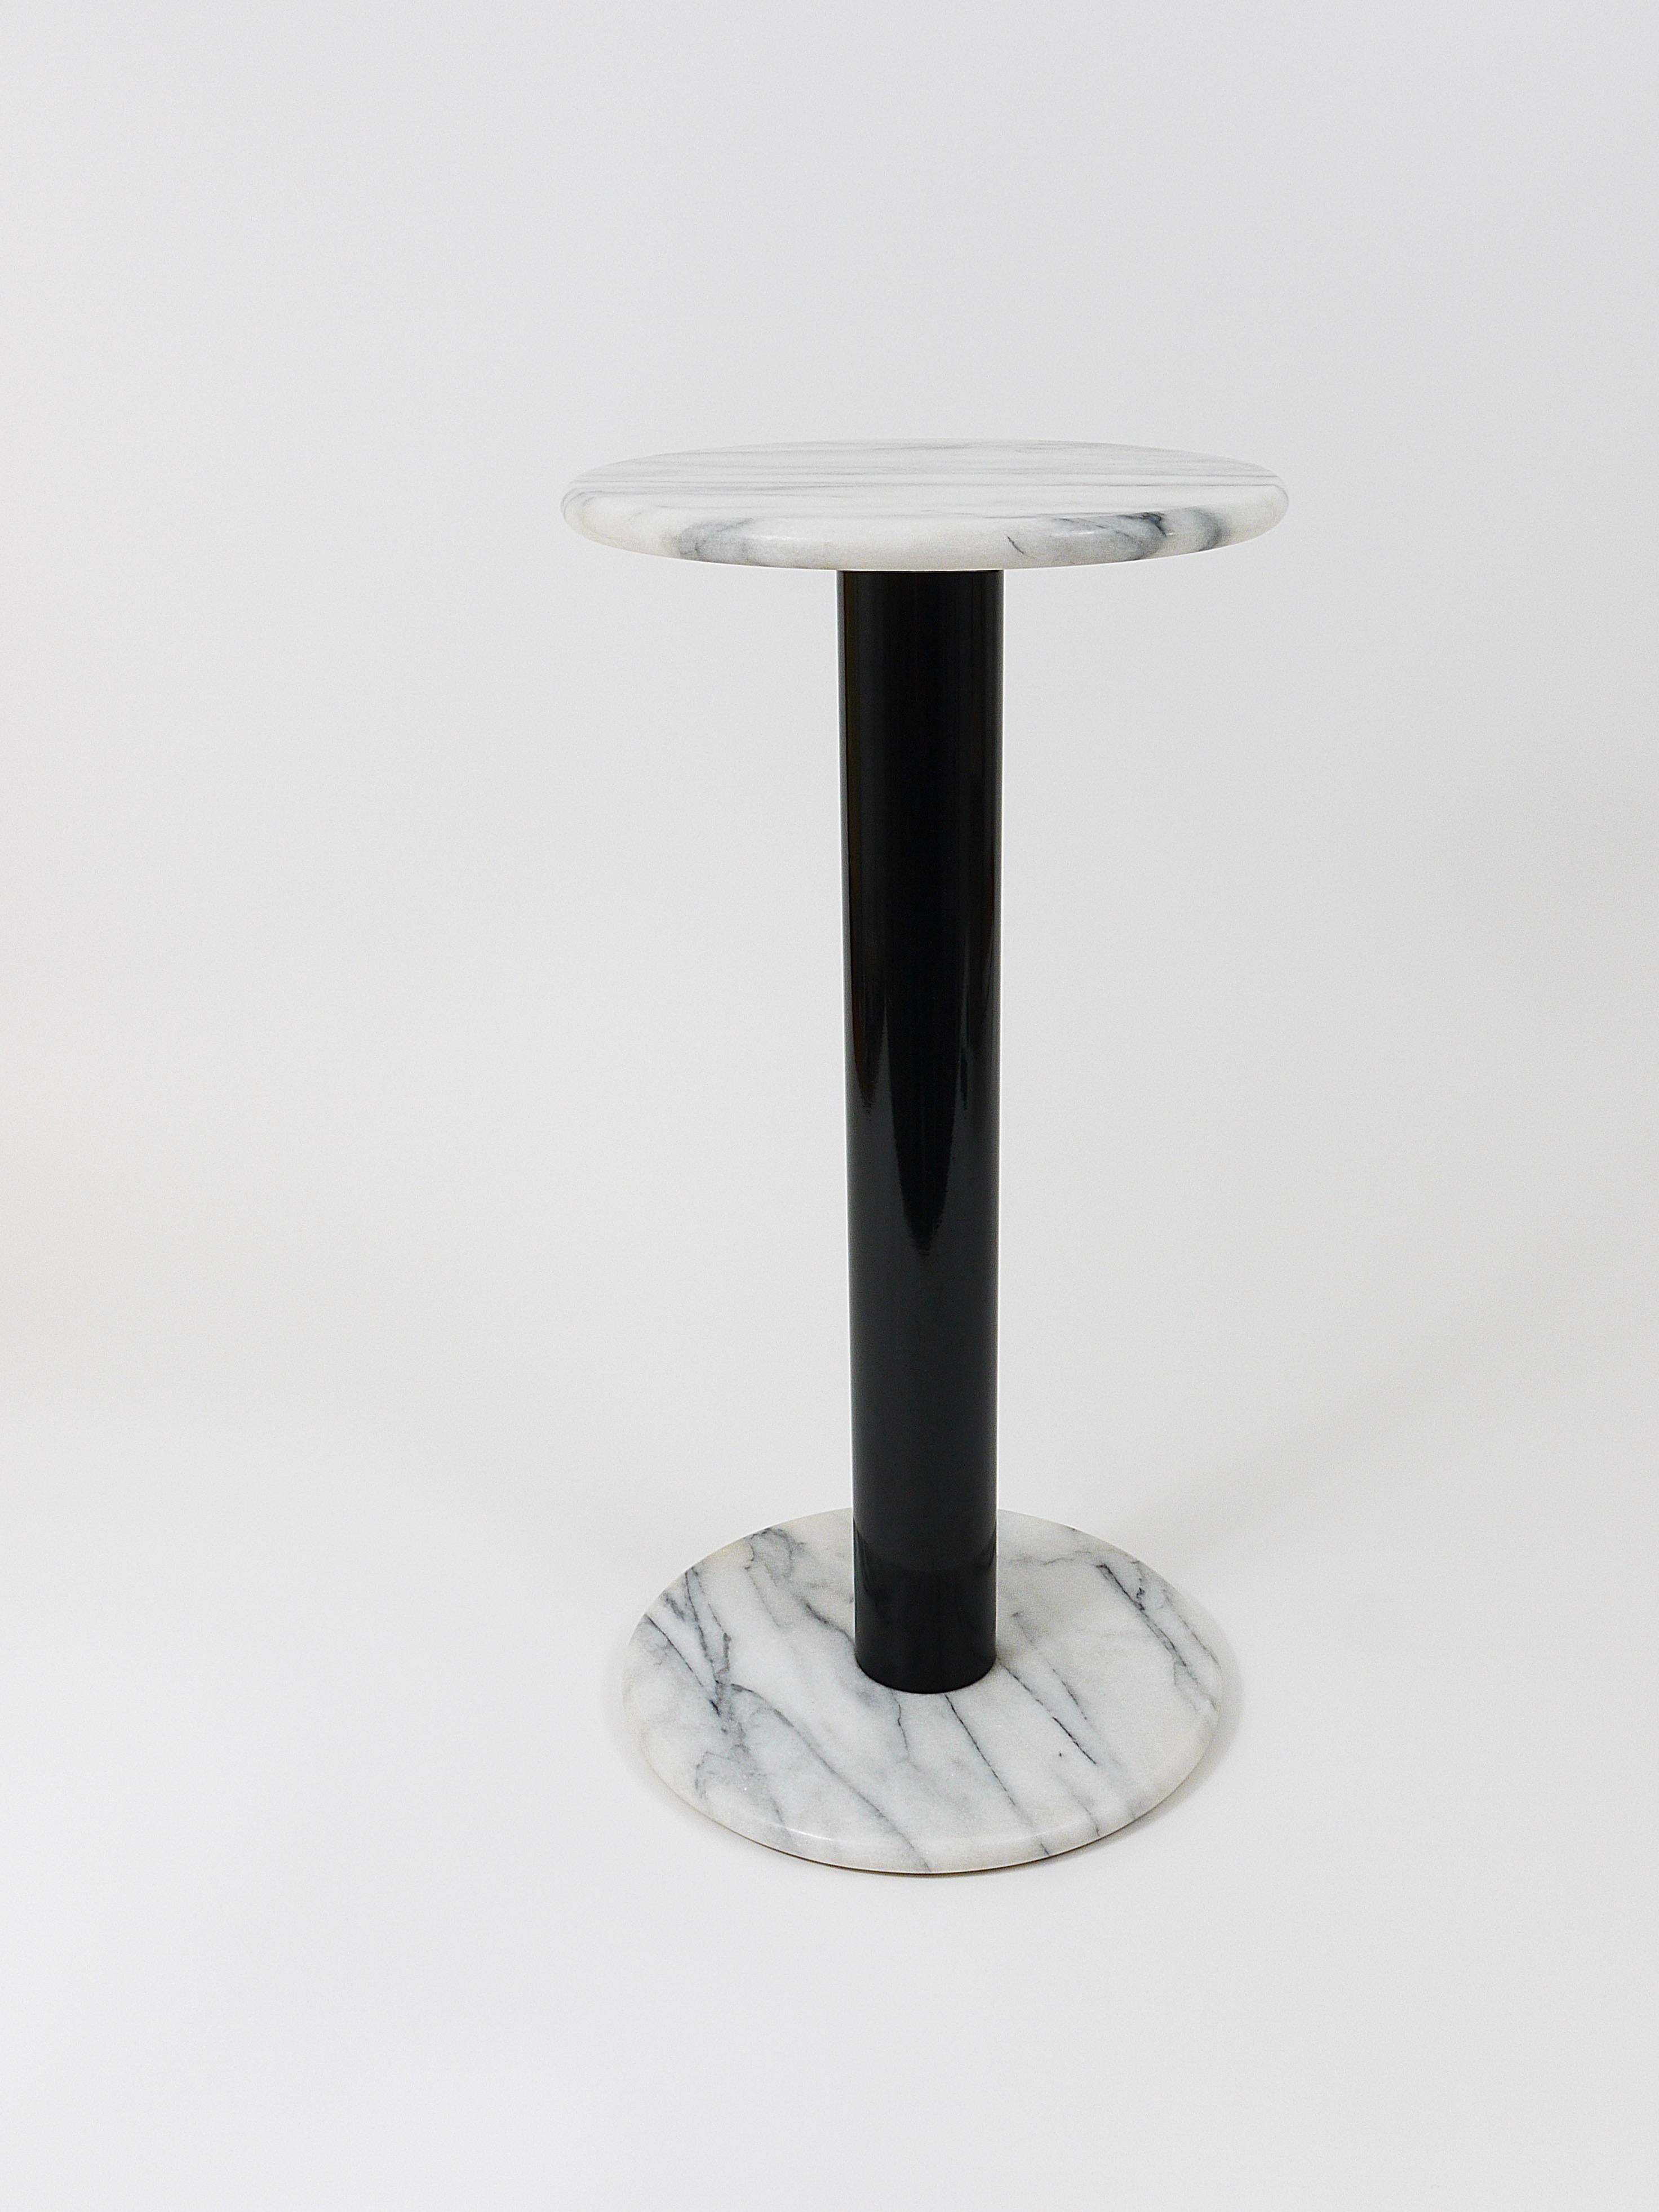 Postmodern White Carrara Marble Flower Stand Pedestal Table, Italy, 1980s For Sale 2